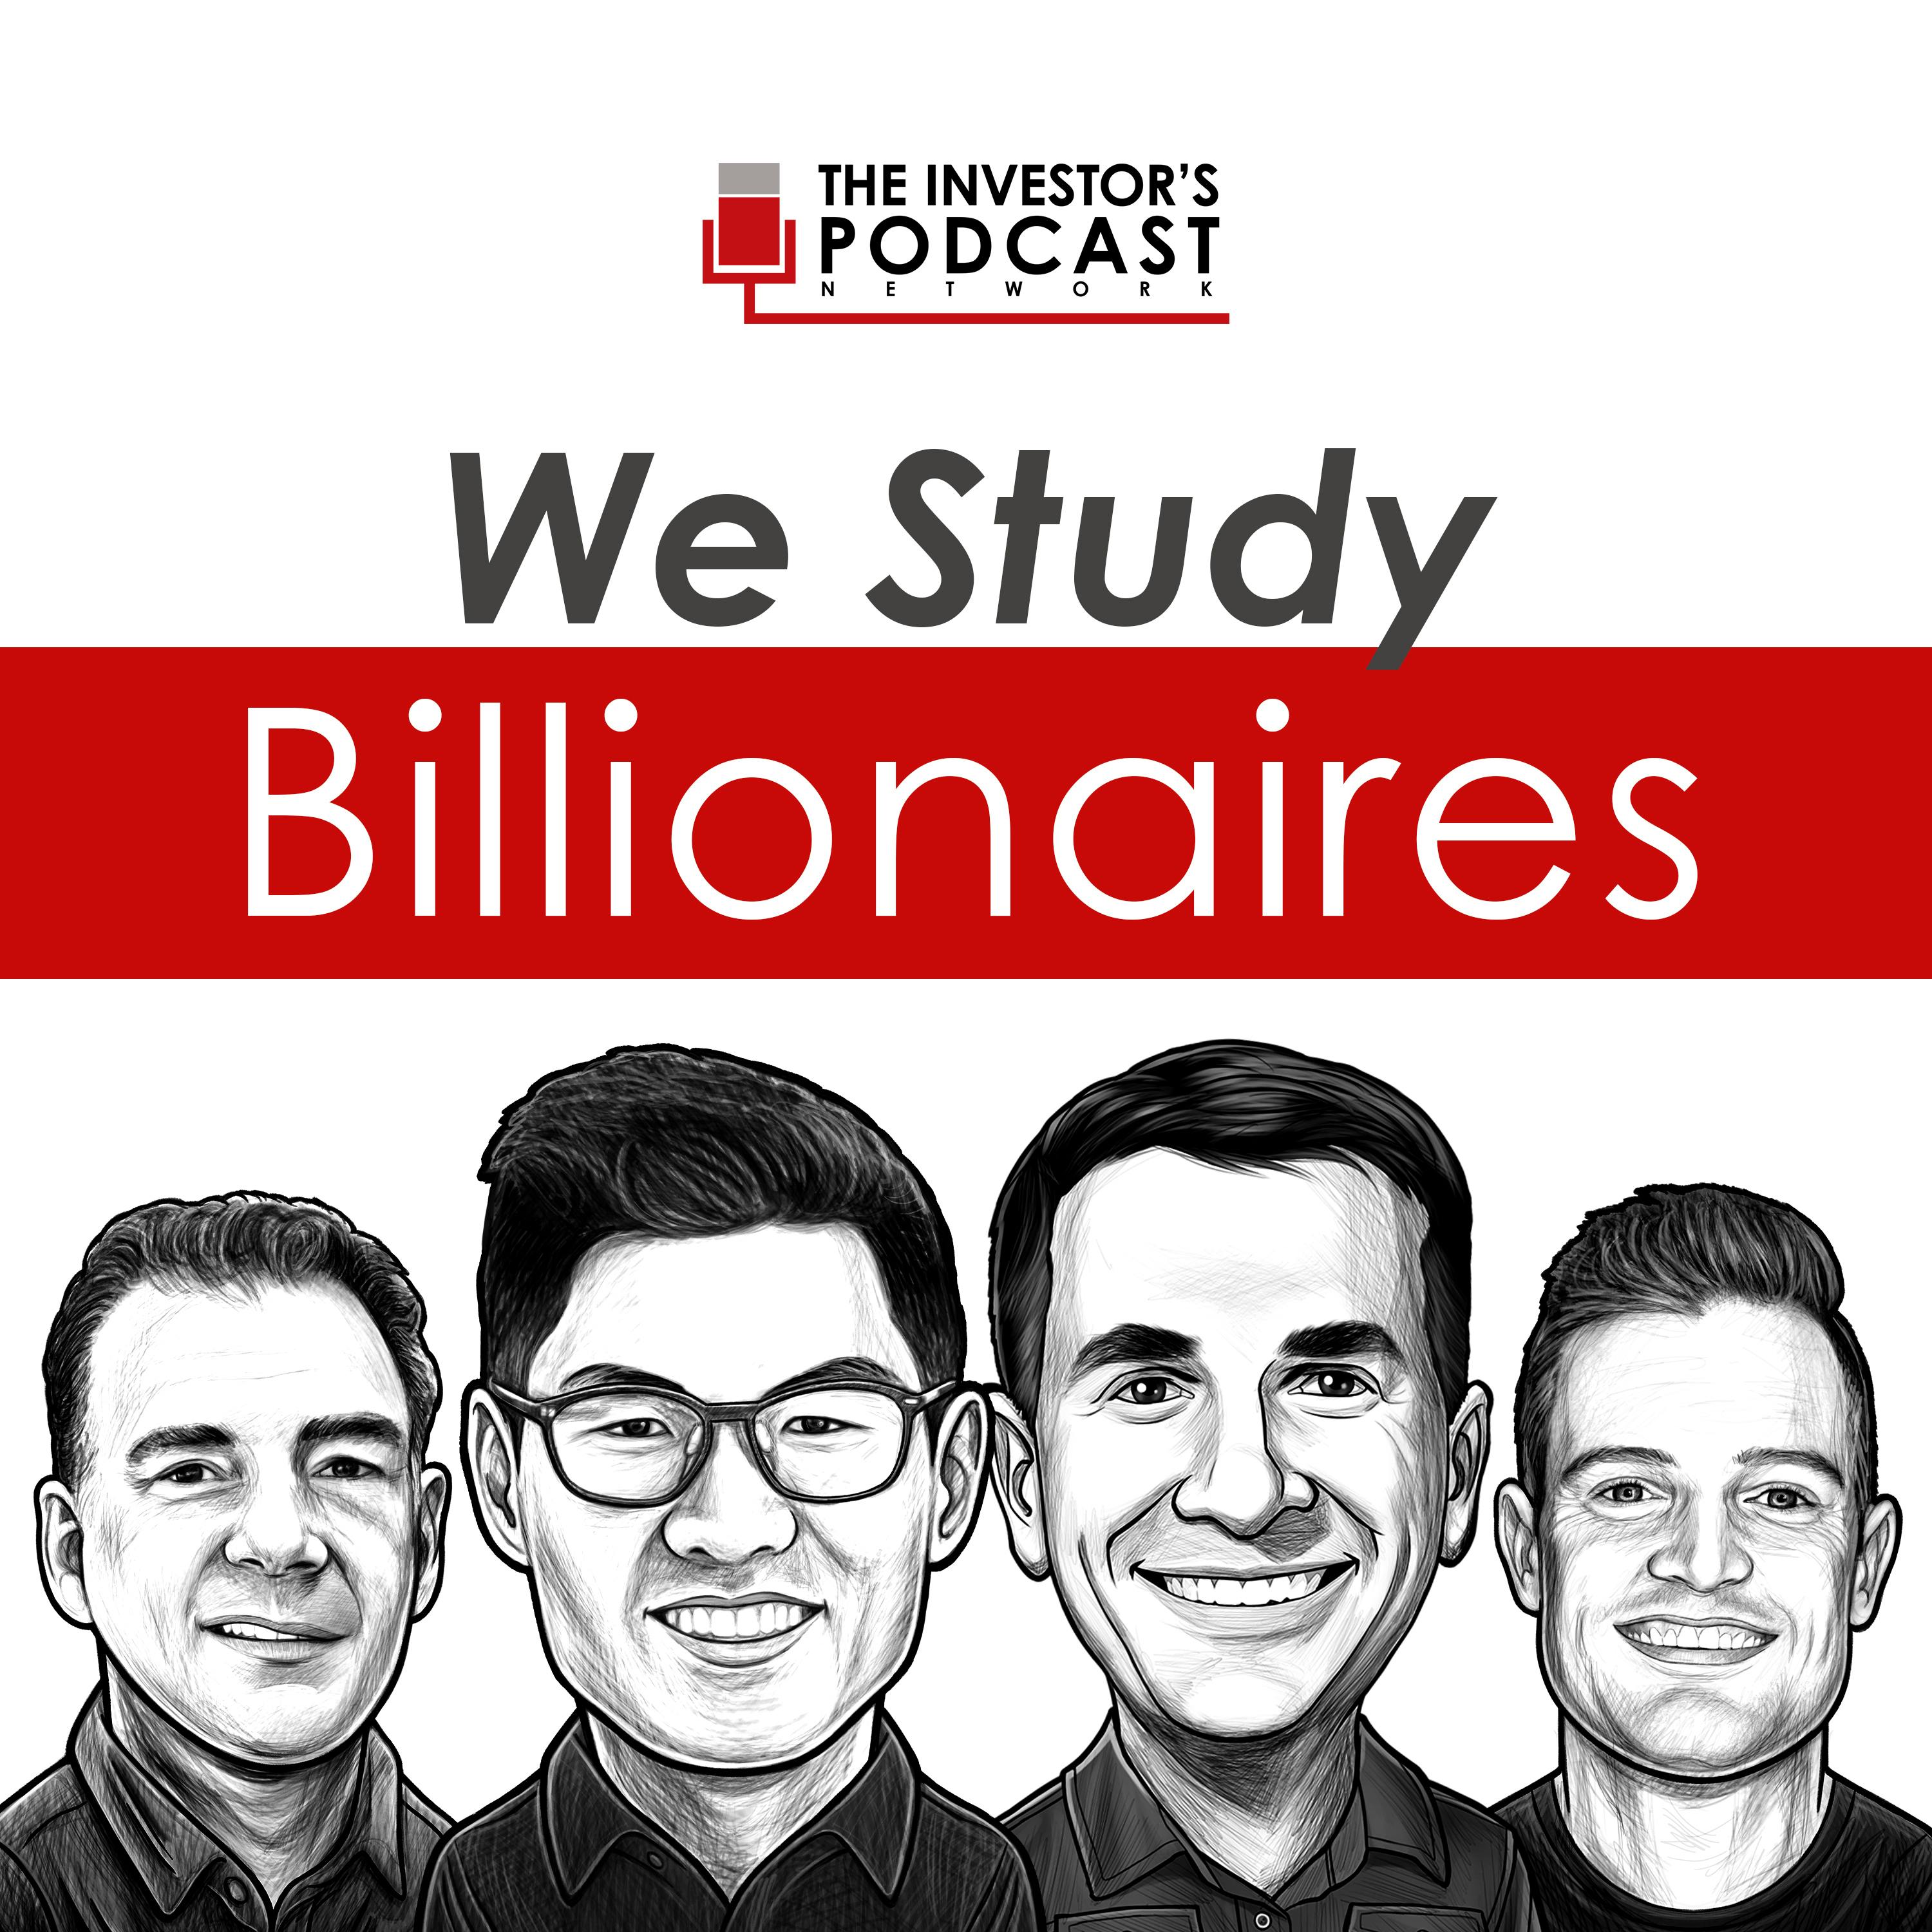 We Study Billionaires by The Investor’s Podcast Network